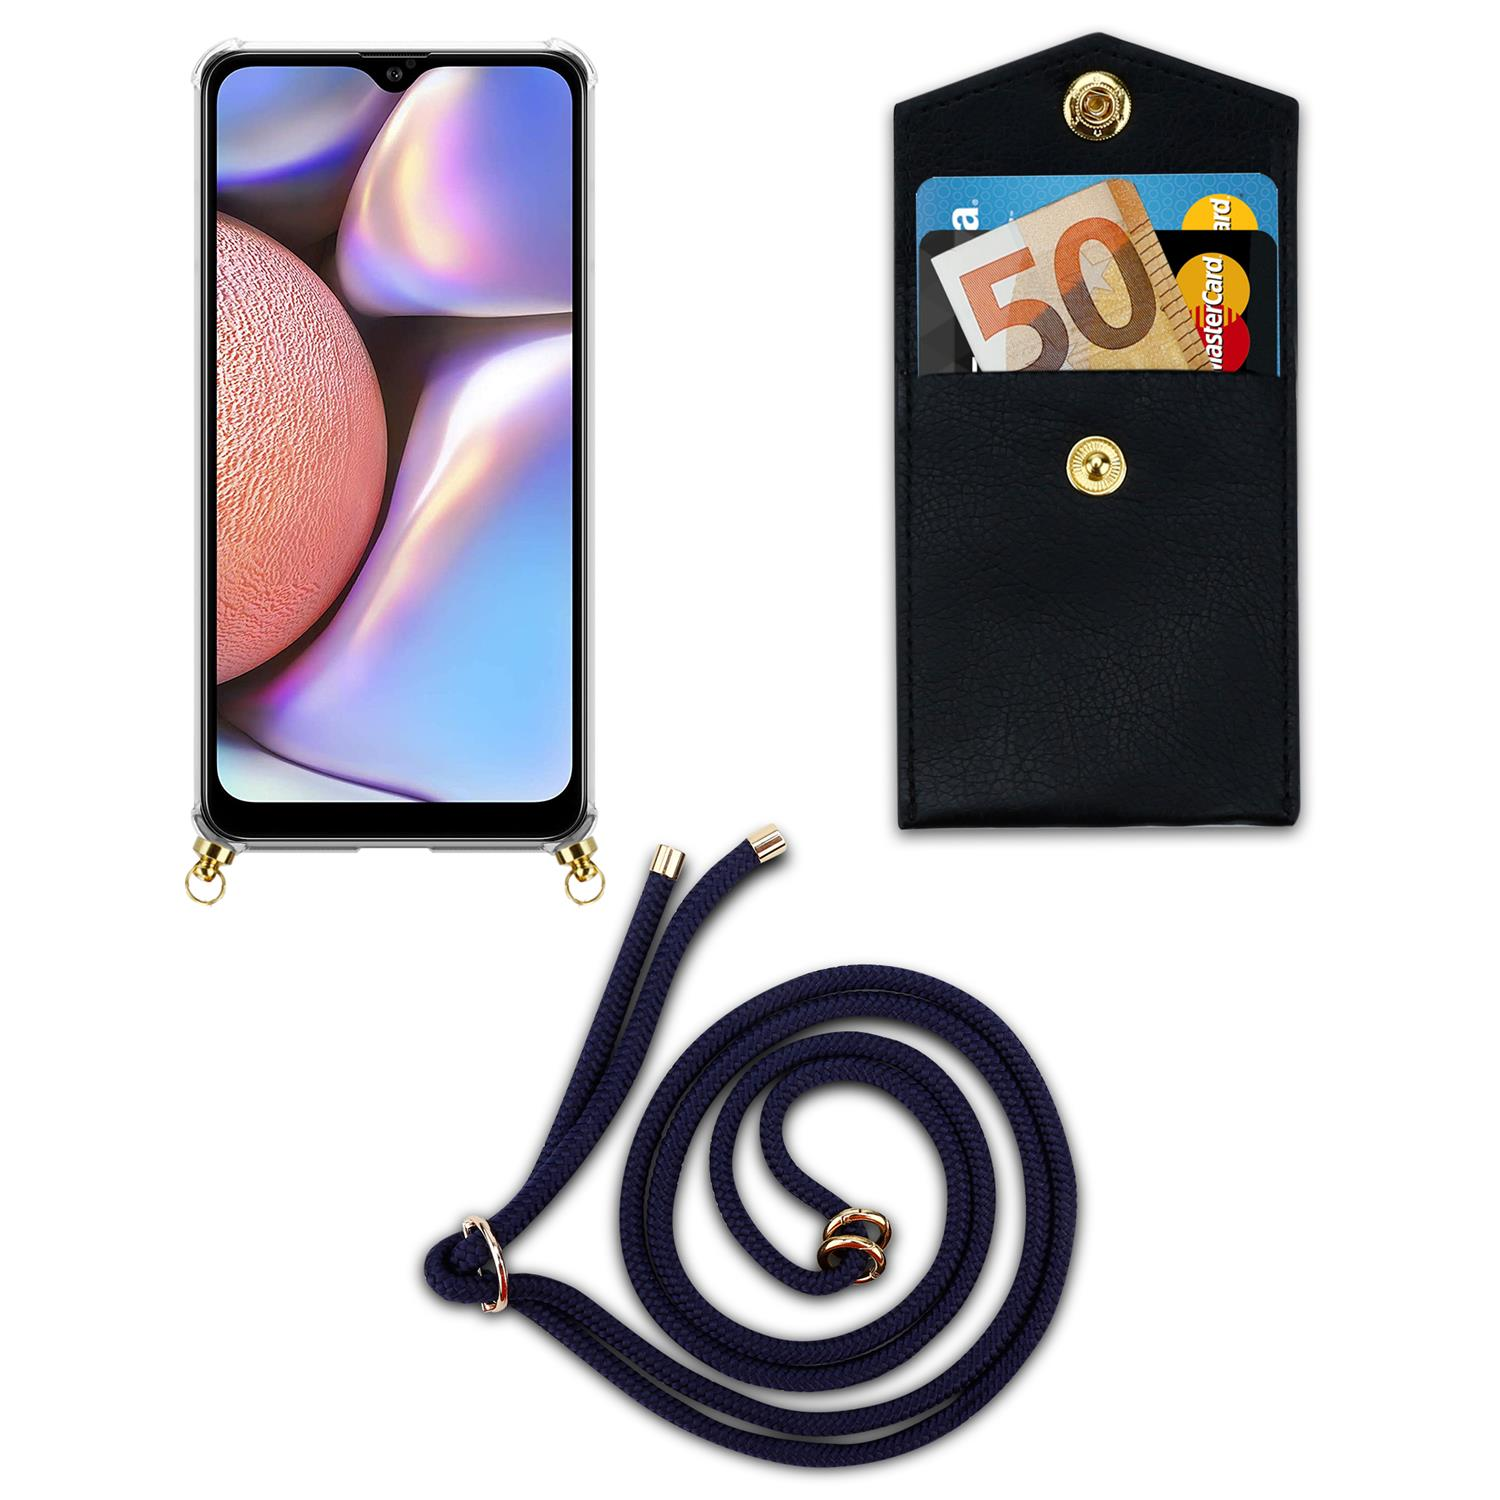 CADORABO Handy A10s mit Backcover, Kordel TIEF Galaxy Kette M01s, Ringen, Samsung, und abnehmbarer BLAU Gold Band / Hülle